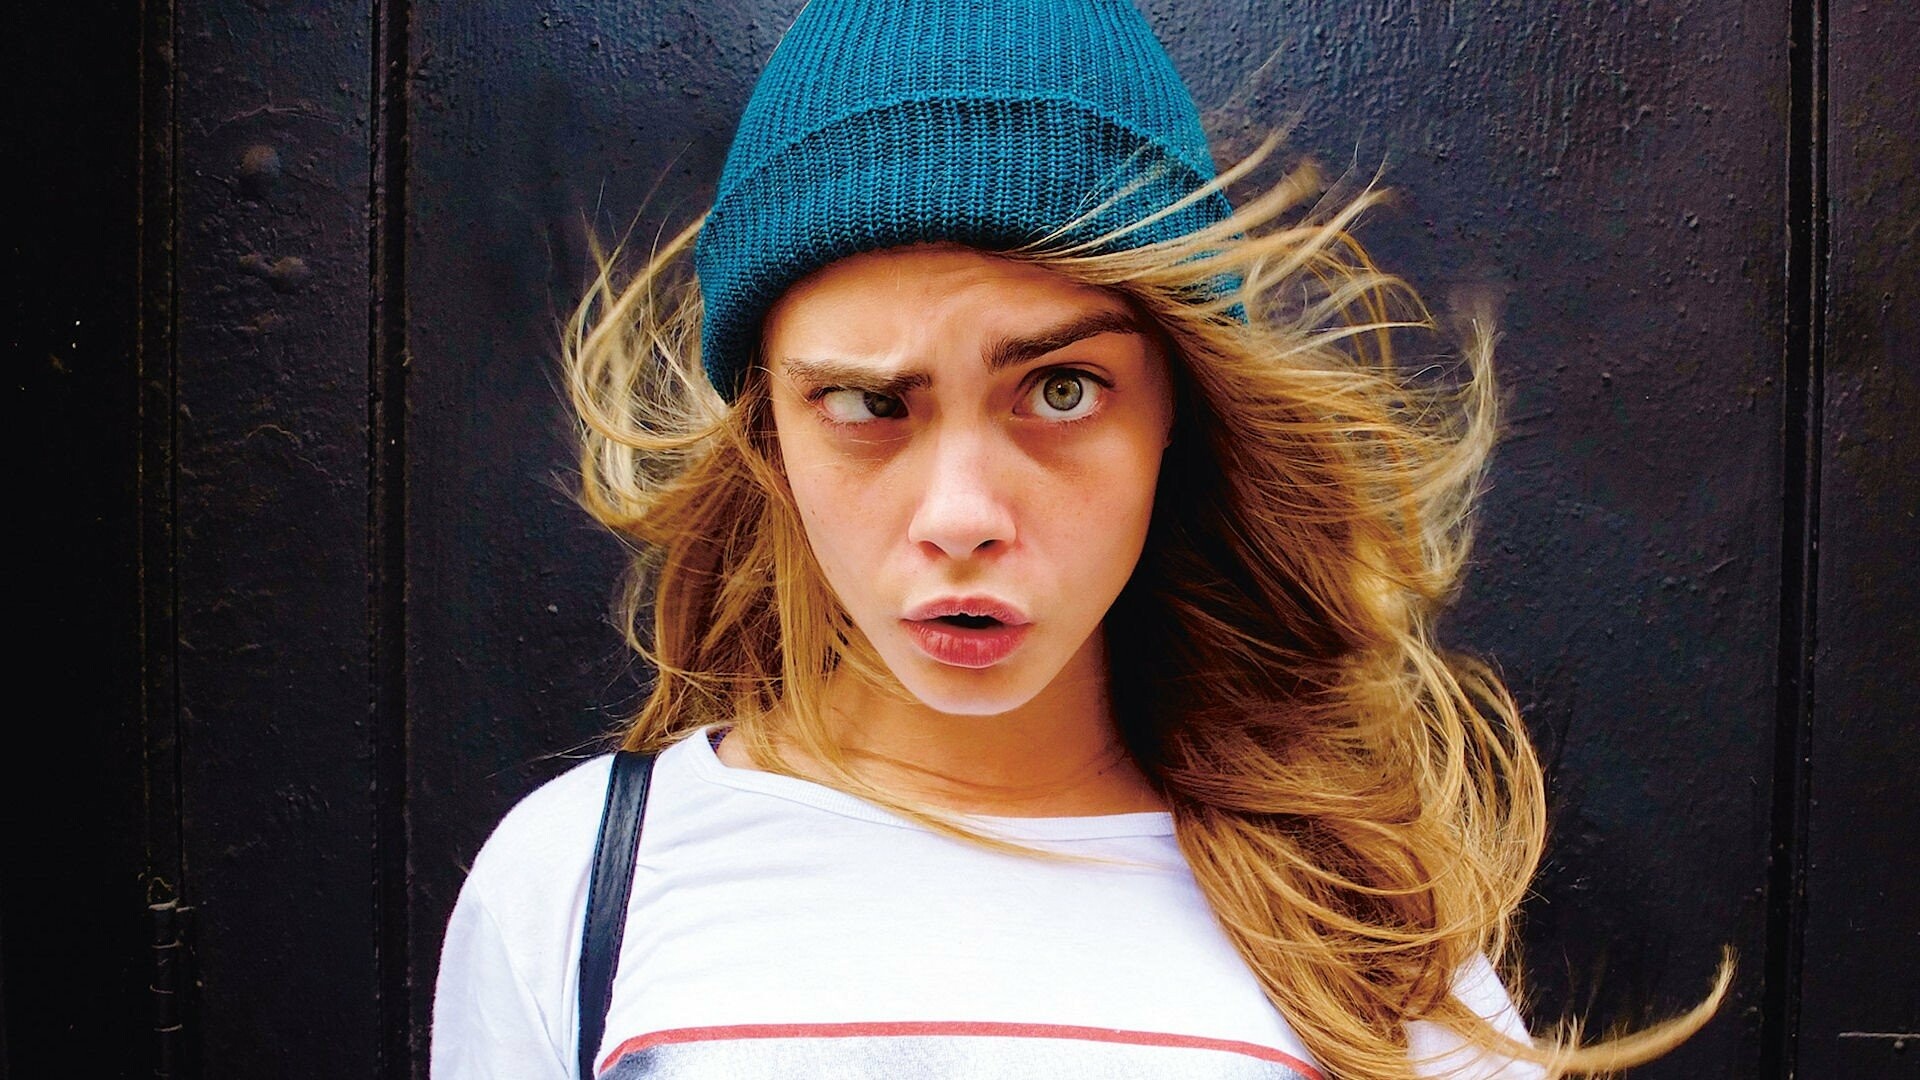 Cara Delevingne: A social justice warrior, The cofounder of climate change nonprofit EcoResolution. 1920x1080 Full HD Wallpaper.